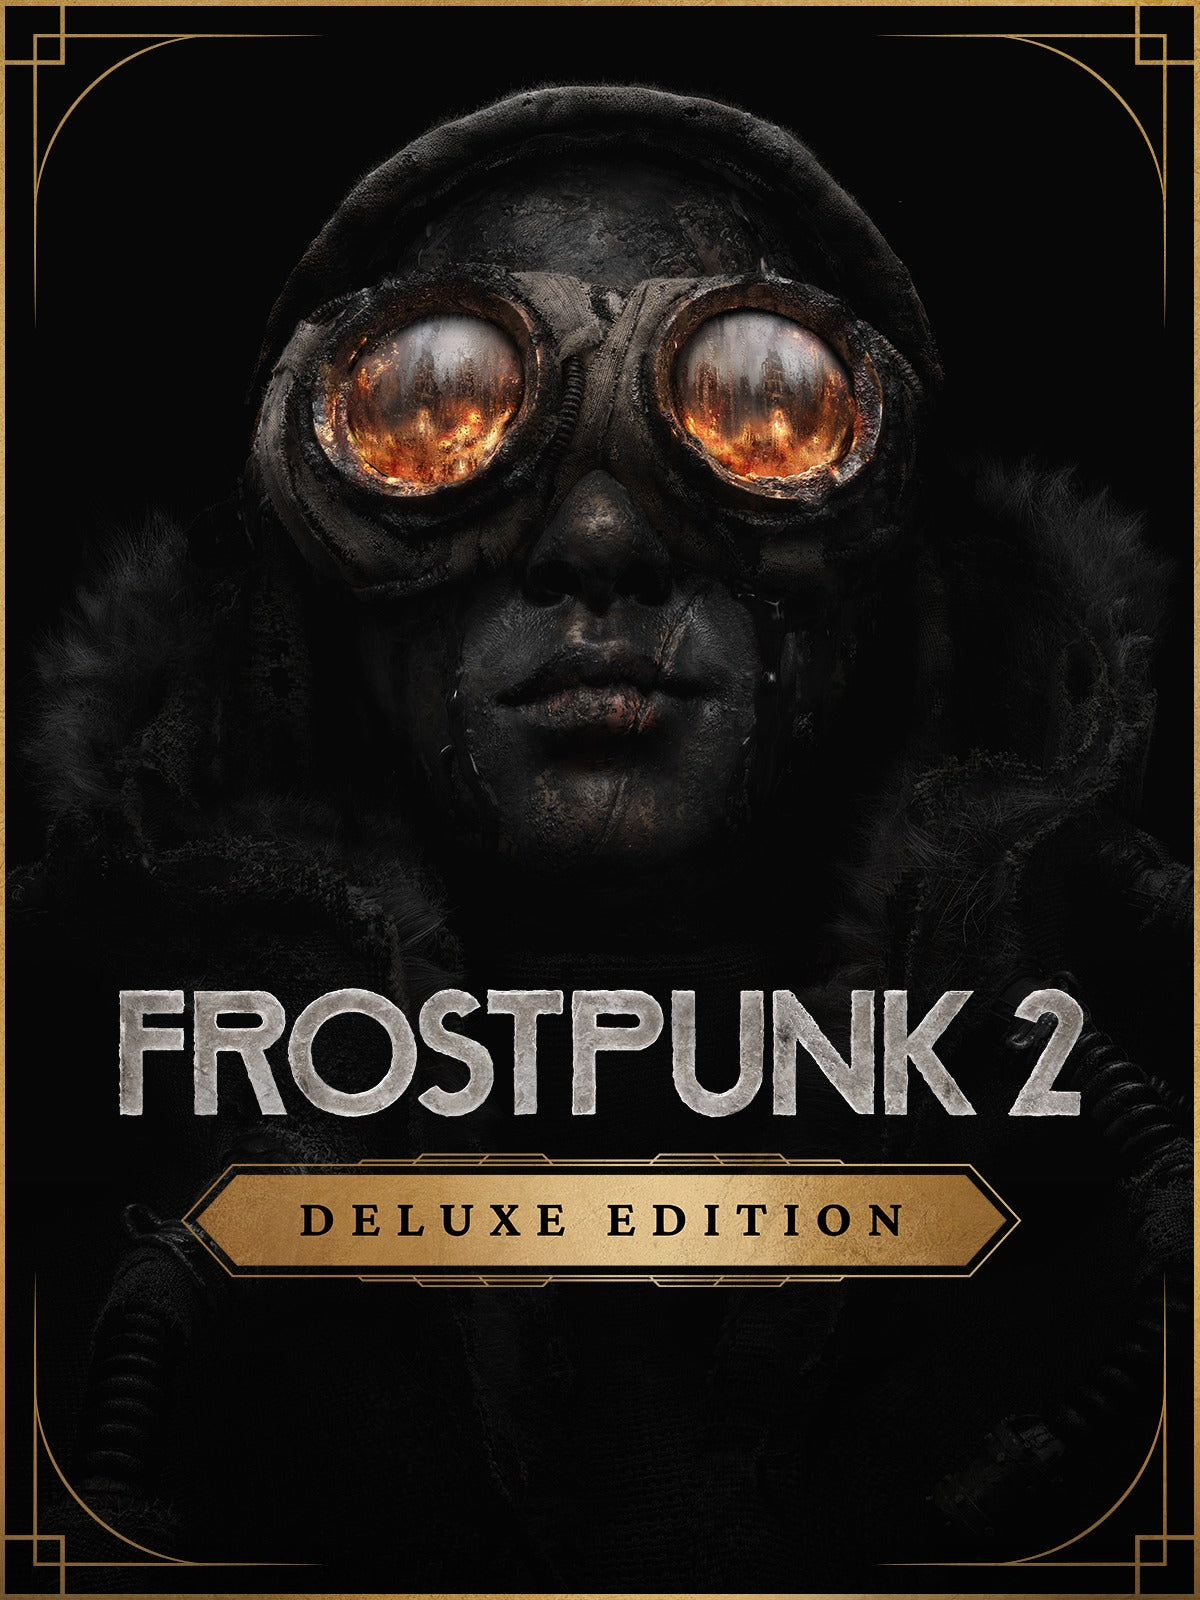 Frostpunk 2 (Deluxe Edition) - Xbox